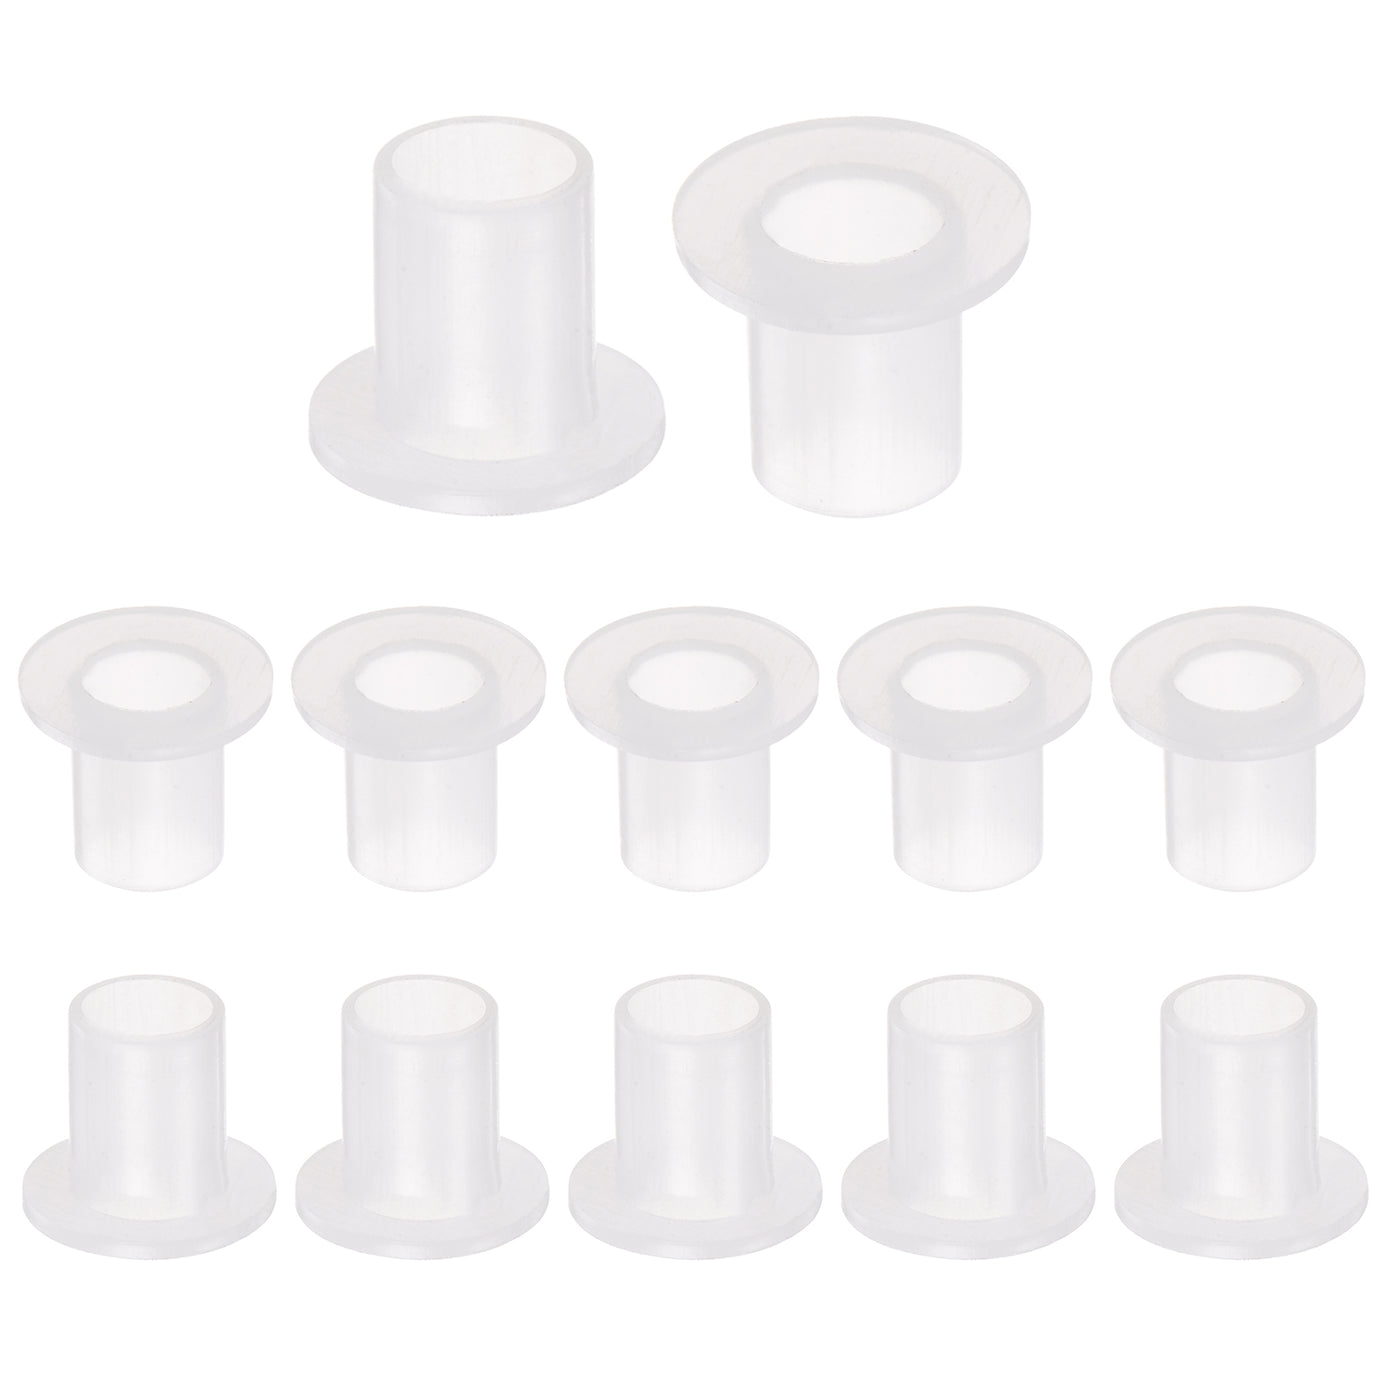 uxcell Uxcell 12pcs Flanged Sleeve Bearings 7.5mm ID 9mm OD 12mm Length Nylon Bushings, White